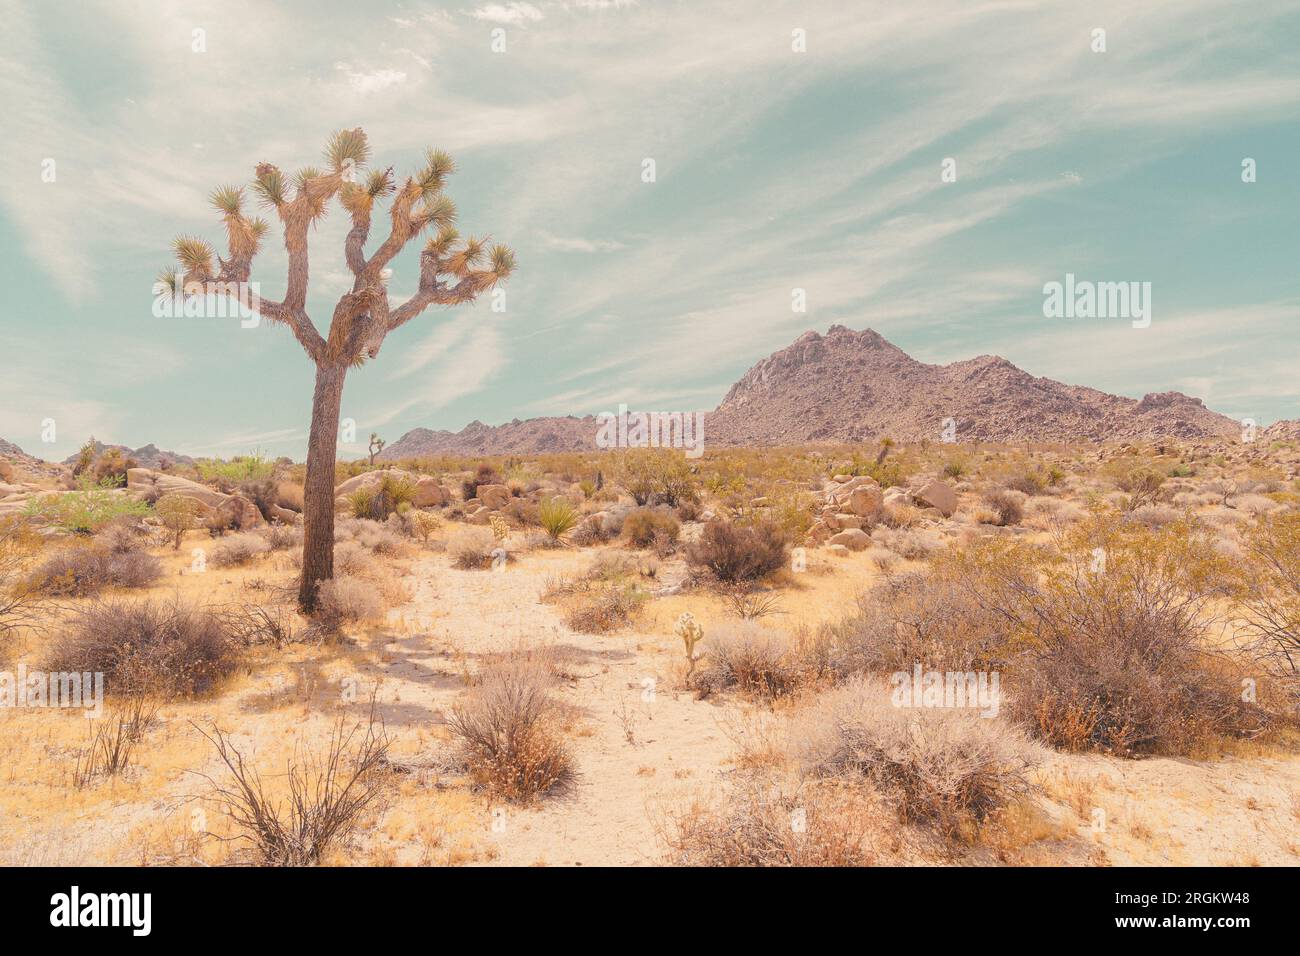 Landscape view of the Desert View Conservation Area in Joshua Tree, California. Landscape format using a high-key photography style. Stock Photo